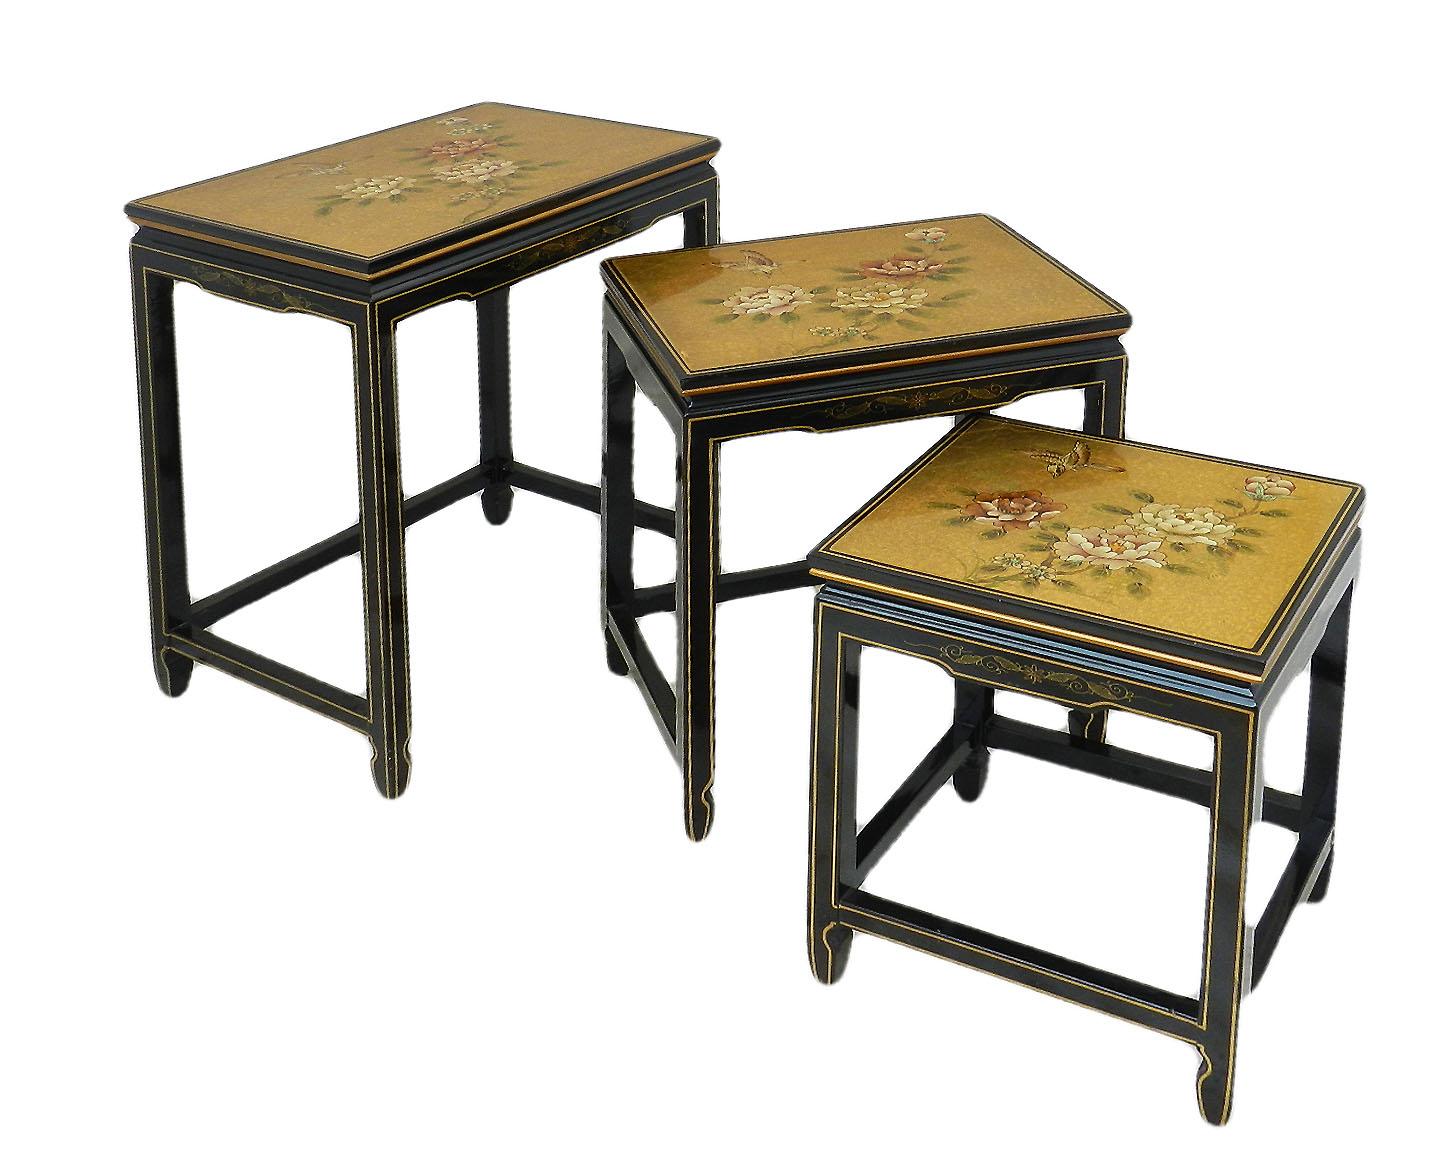 Nest of 3 tables Chinese export chinoiserie 20th century
Tops decorated with birds and flowers 
Black lacquer with gold details
Good vintage condition with minor marks of use
Tables measure
1) 45.5cms 17.9ins wide 33cms 13ins deep 61.5cms